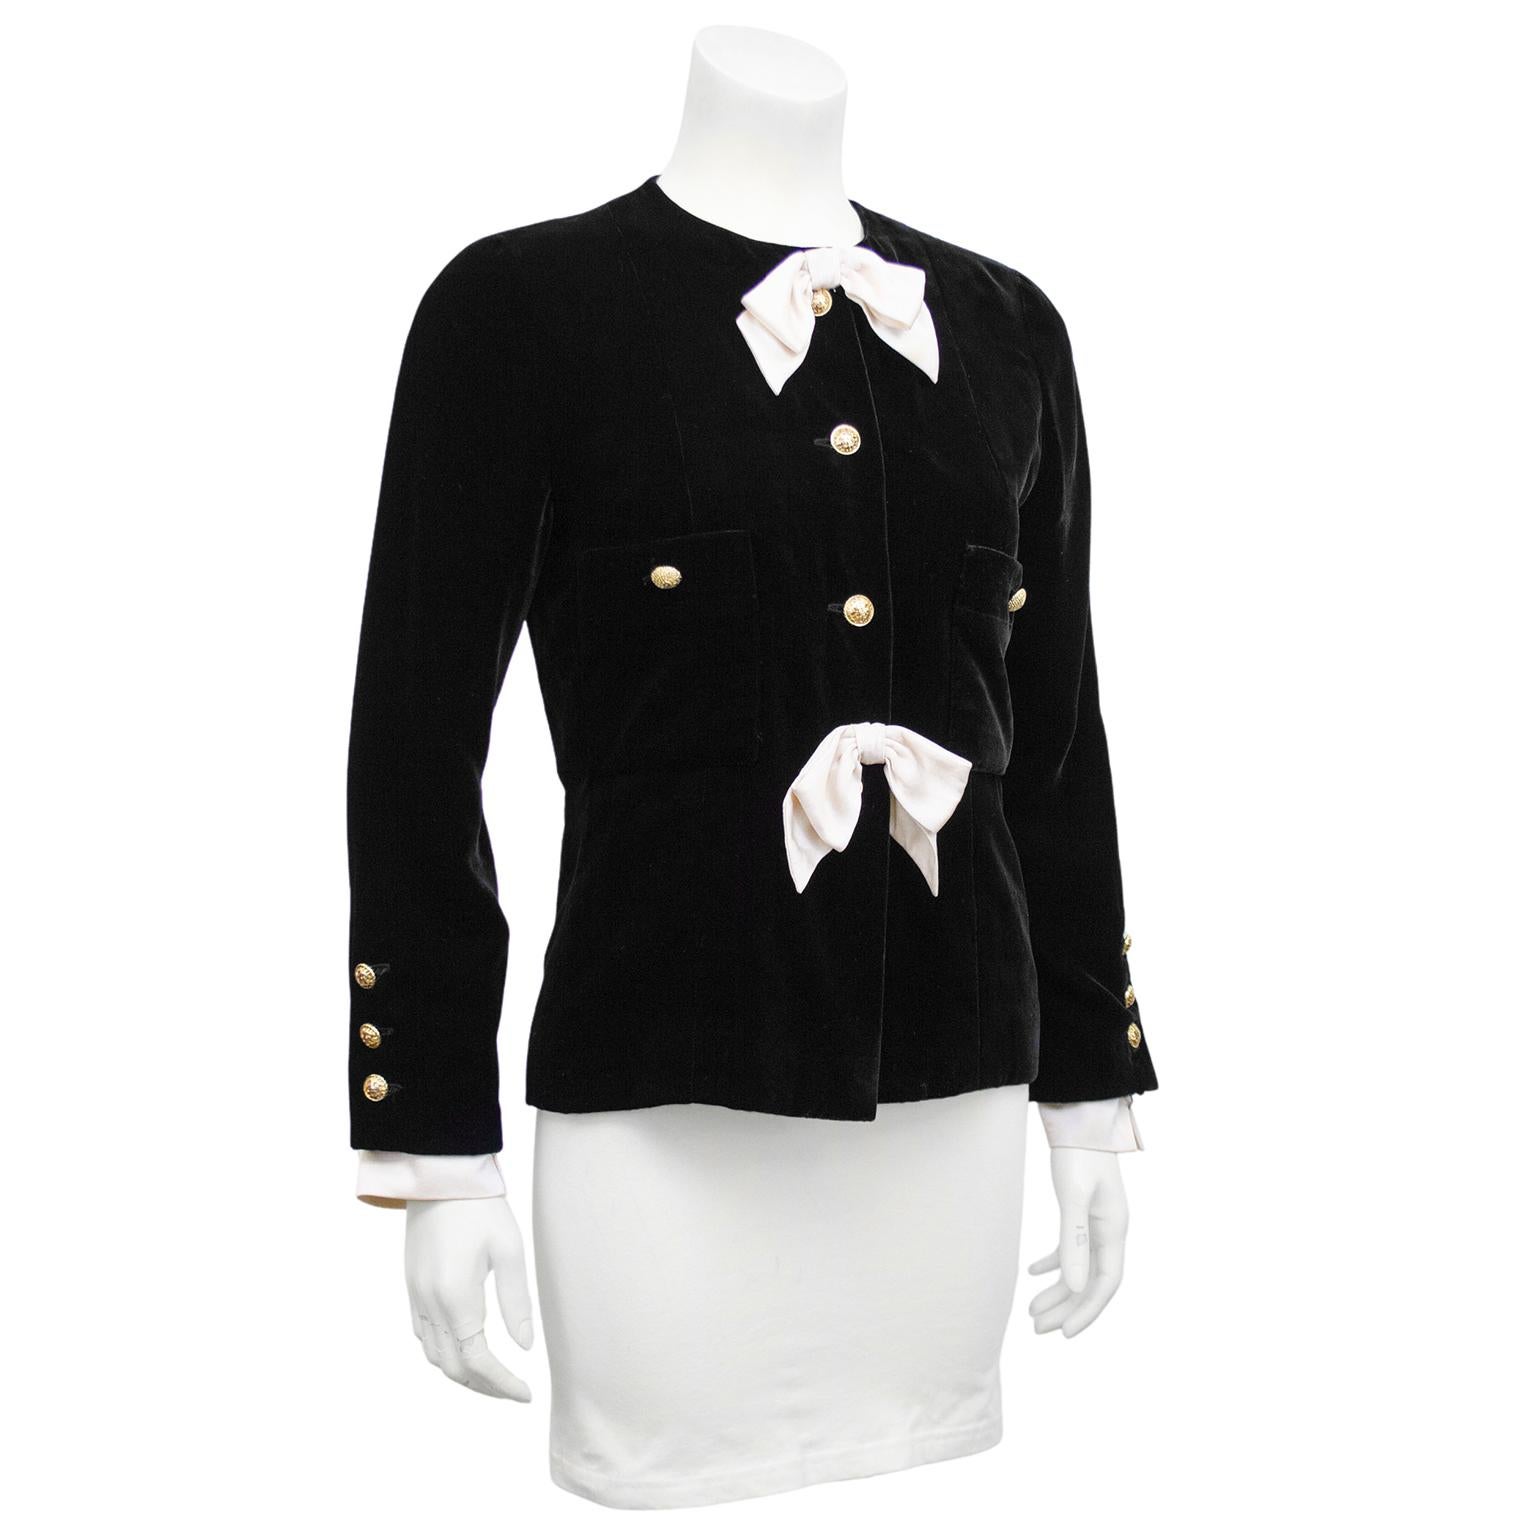 Stunning and classic fitted Chanel collarless jacket from the late 1980's. Jet black silk velvet with cream satin bow details at collar and waist, and cream satin removable cuffs. Gold tone buttons with filagree flower details. Patch pockets at bust